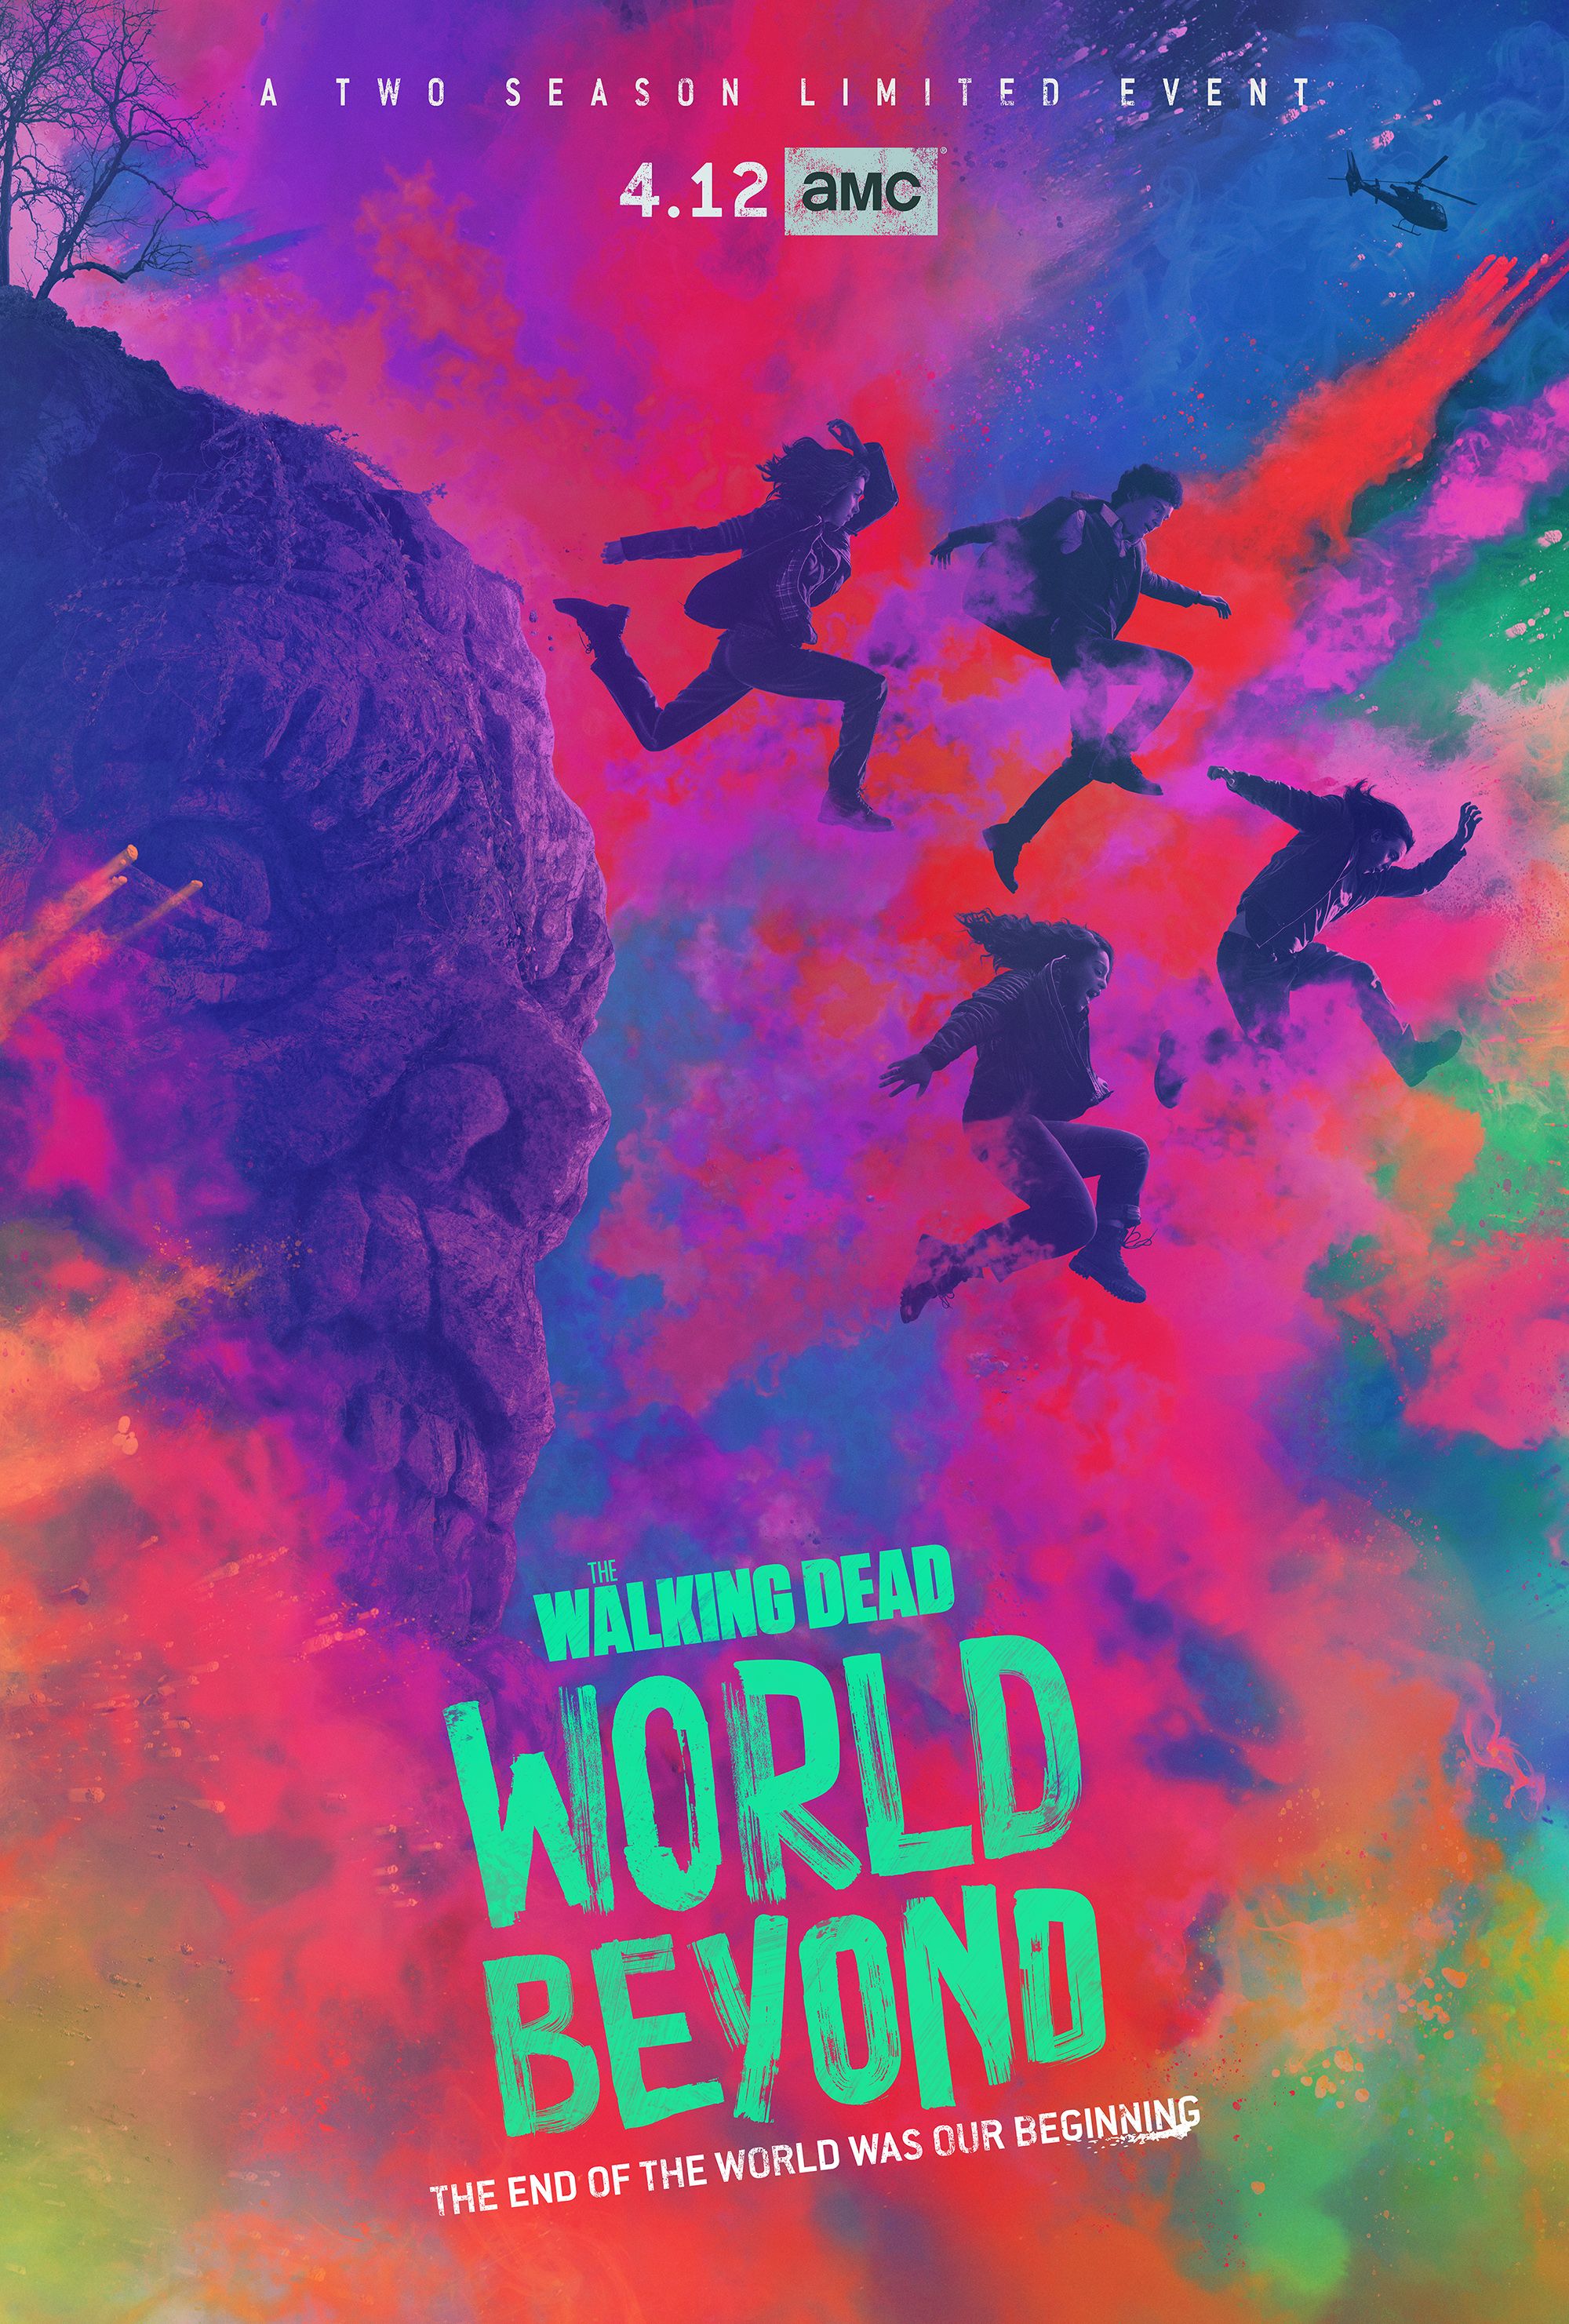 The Walking Dead World Beyond TV Show Poster